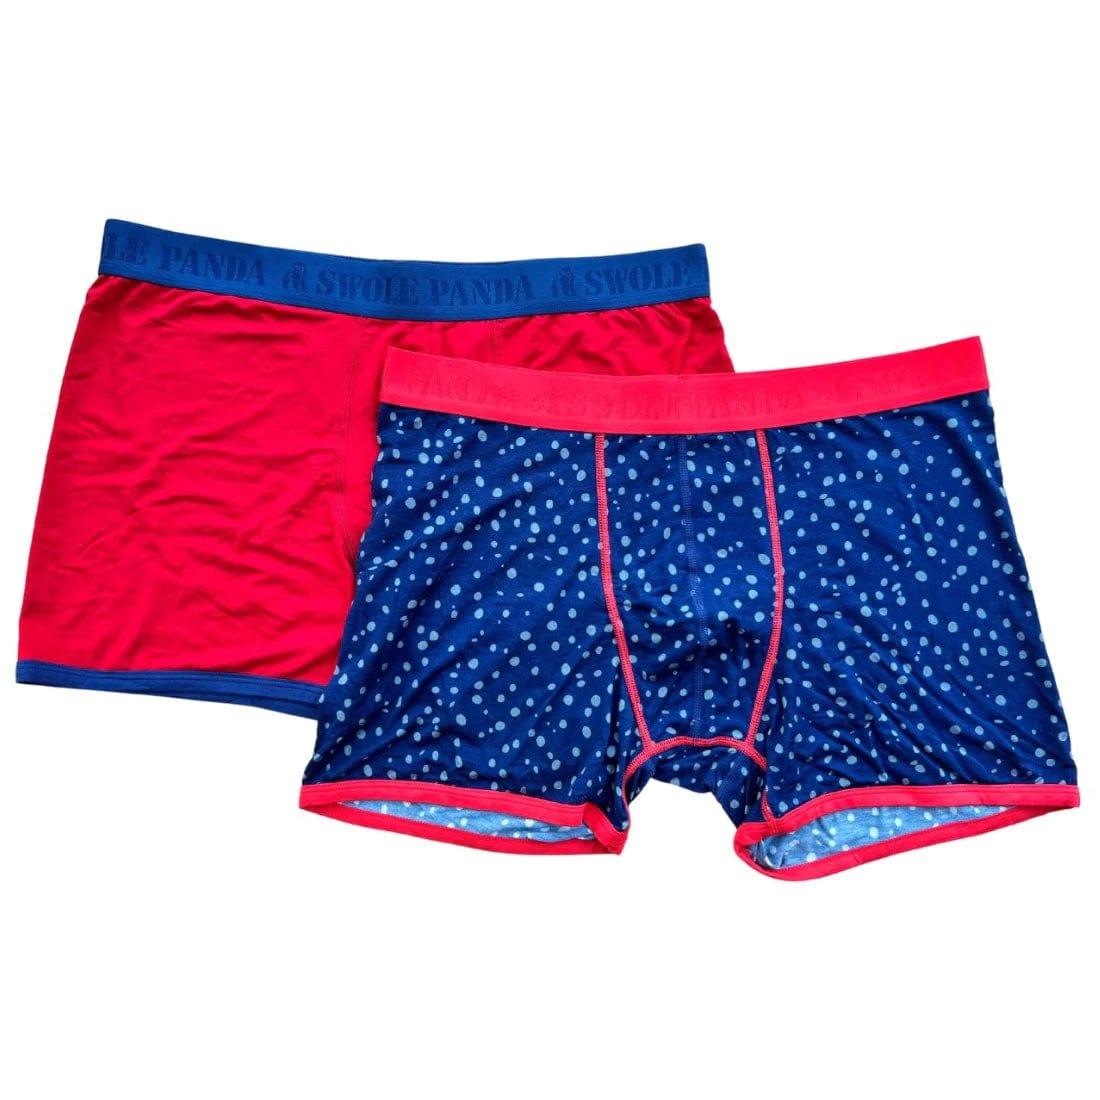 Swole Panda Mens Accessories 2 Pack Red & Blue Boxers with Grey Spots